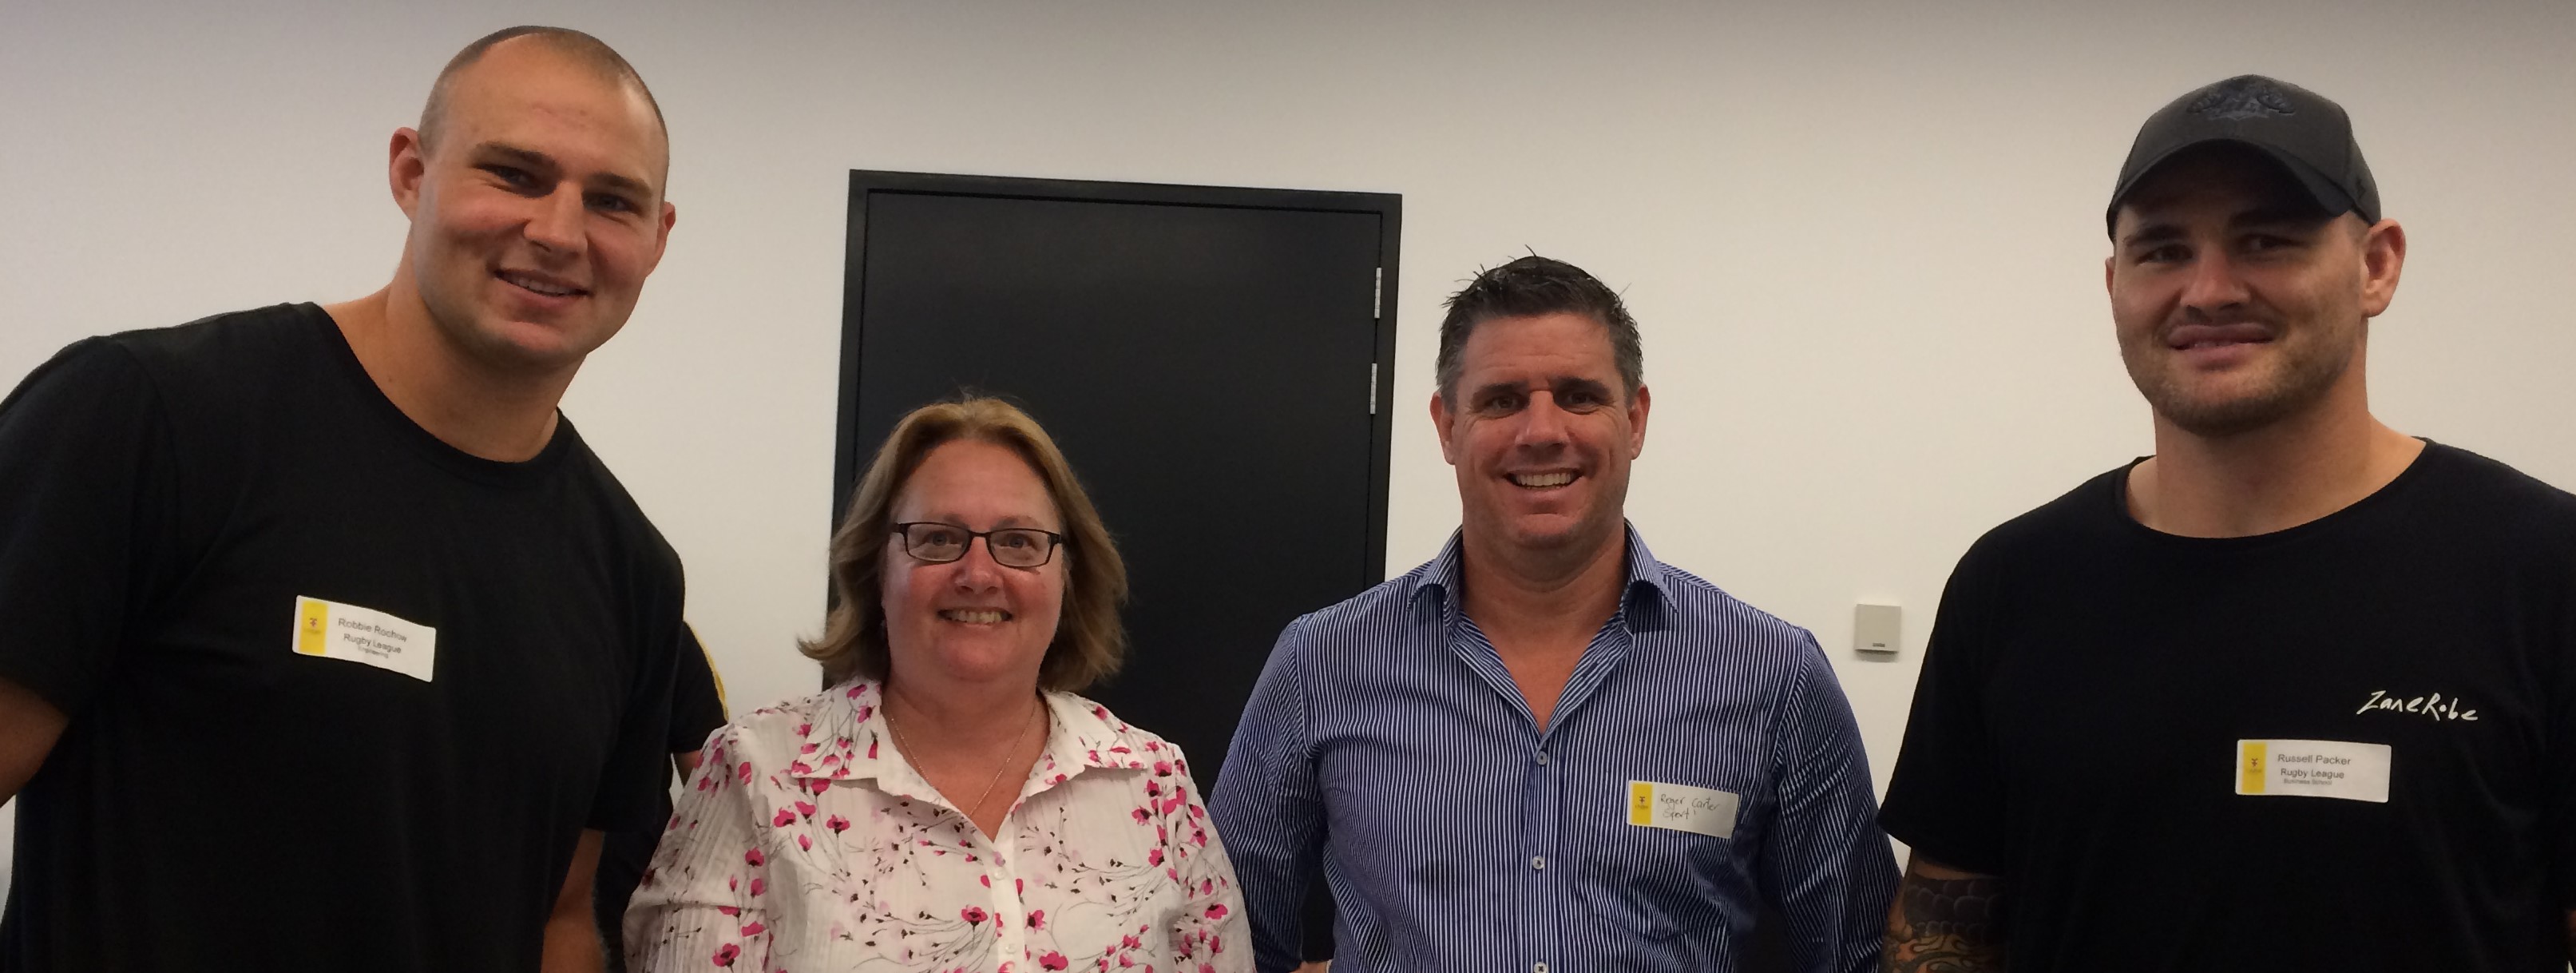 Robbie Rochow (left) and Russell Packer (right) with UNSW's Elite Athlete Program Manager Helen Bryson and Sport Development Manager Roger Carter